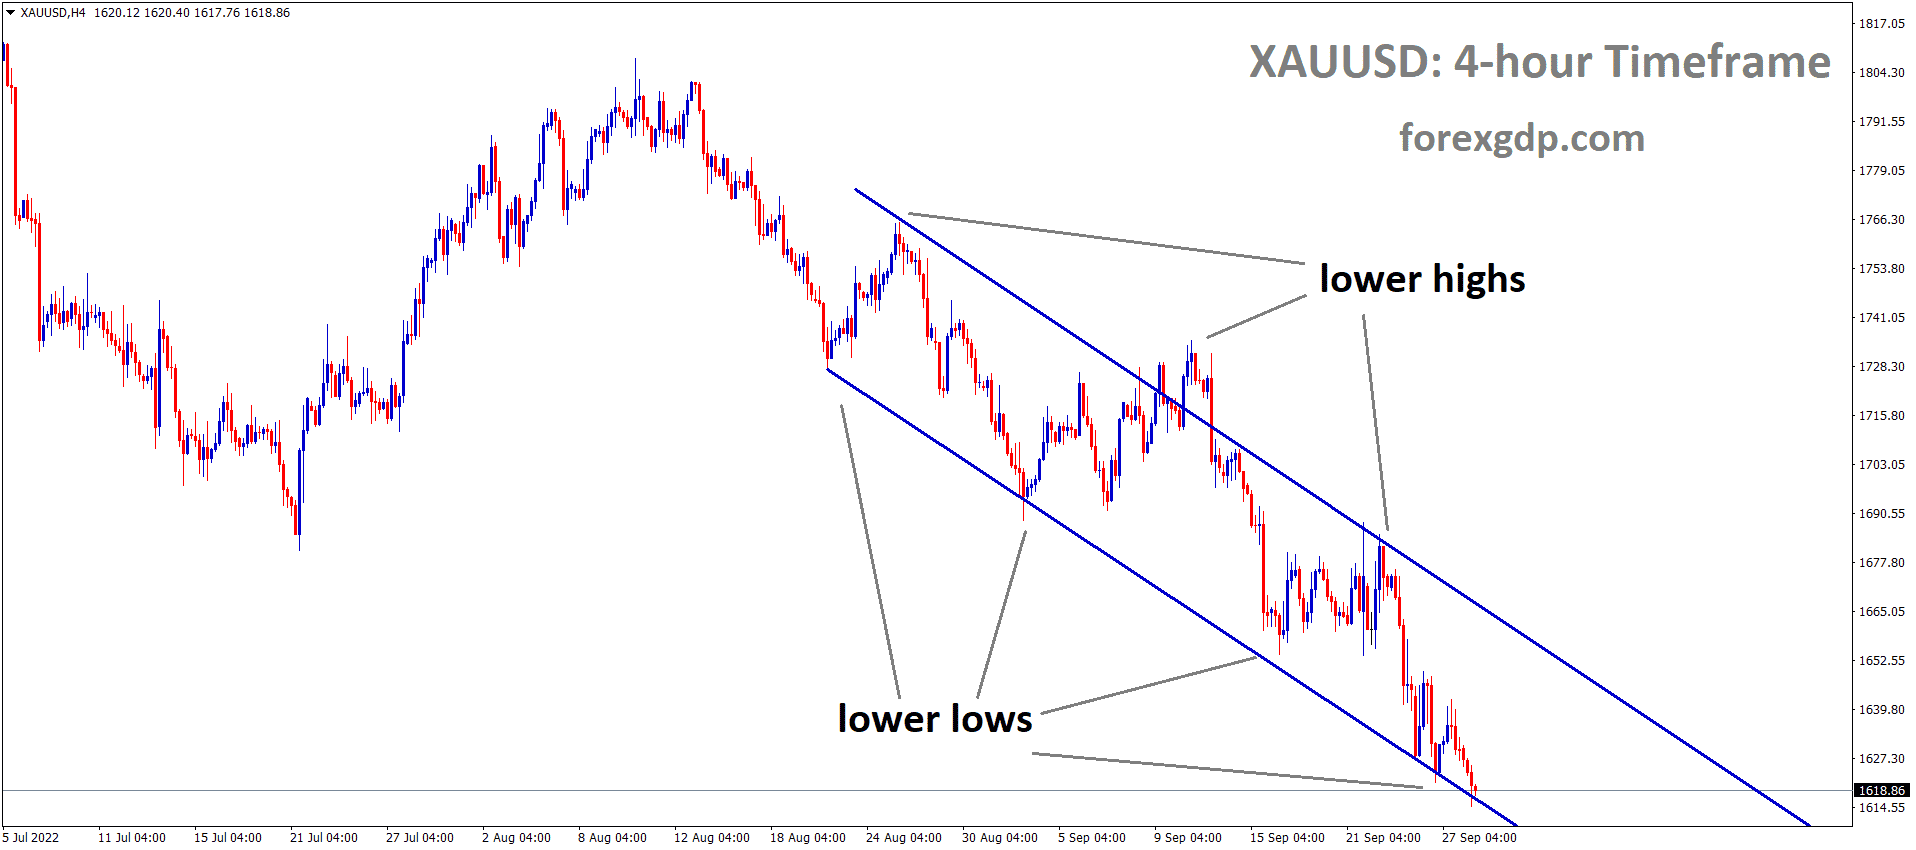 XAUUSD Gold price is moving in the Descending channel and the market has reached the Lower low area of the channel. 1